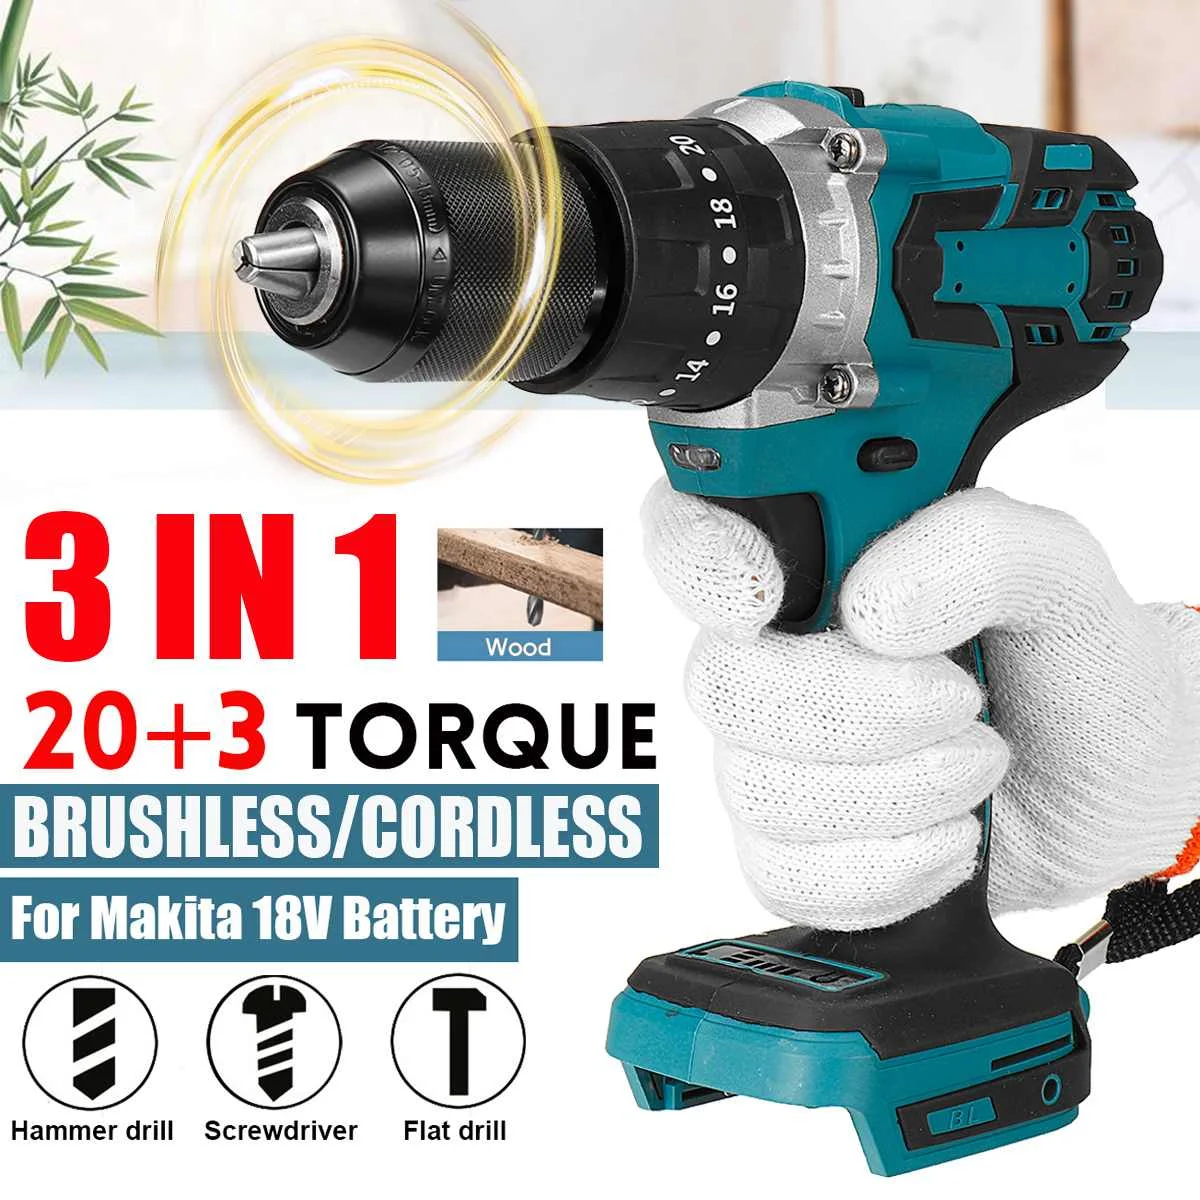 

Drillpro 3 in 1 Brushless Cordless Electric Impact Drill 13mm 20+3 Torque Electric Screwdriver Hammer for Makita 18V Battery